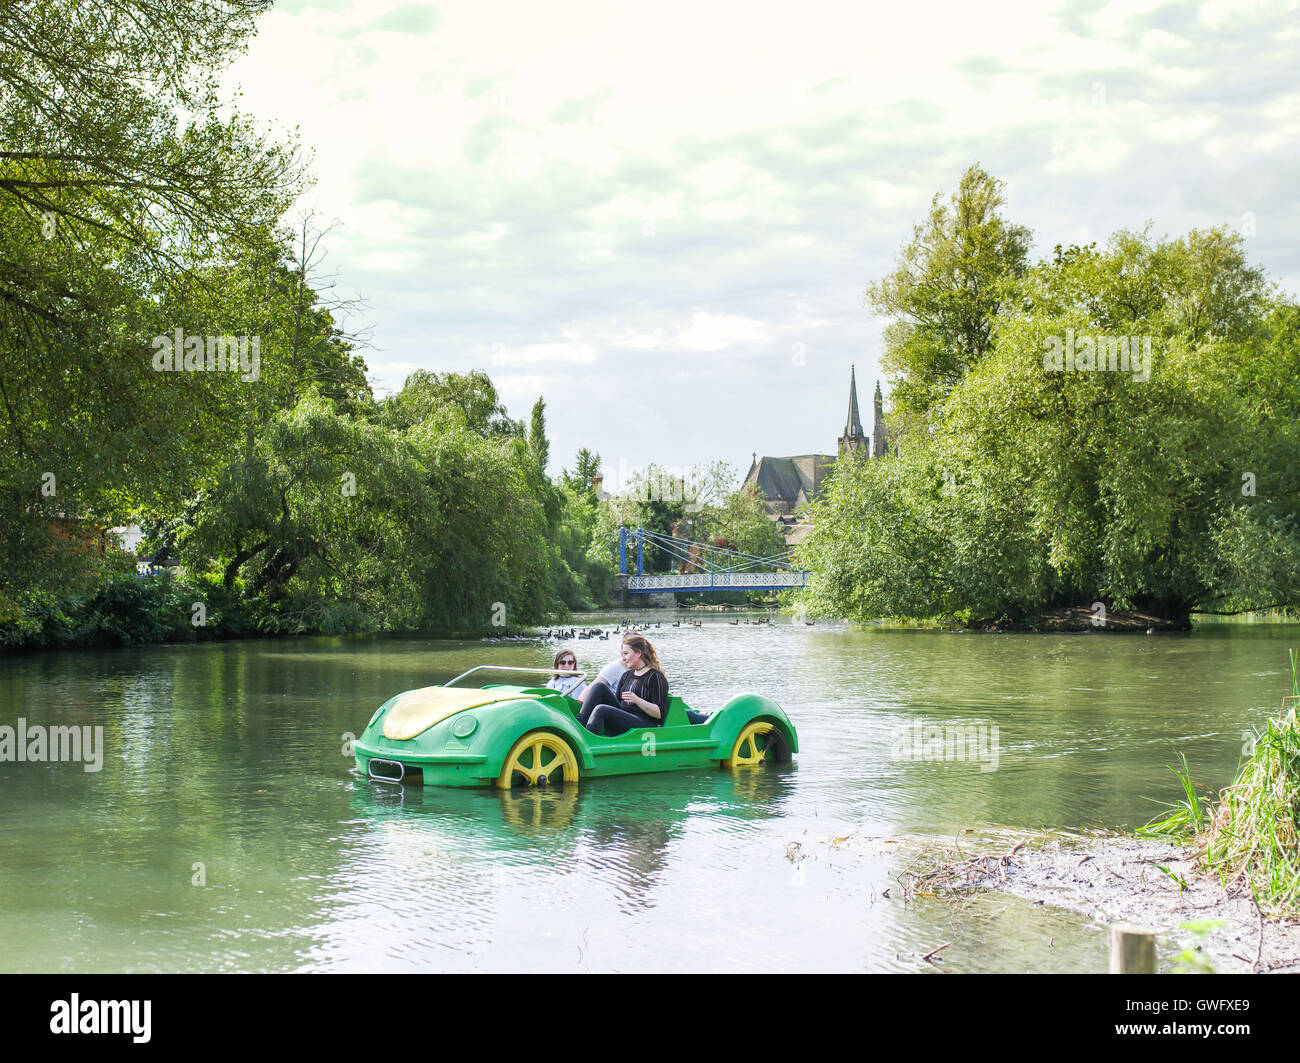 Leamington Spa, Warwickshire, UK. 13th September 2016. Girls ride a pedalo in the shape of a car on the River Leam. Temperatures were very high for the time of year. Credit:  Jamie Gray/Alamy Live News Stock Photo